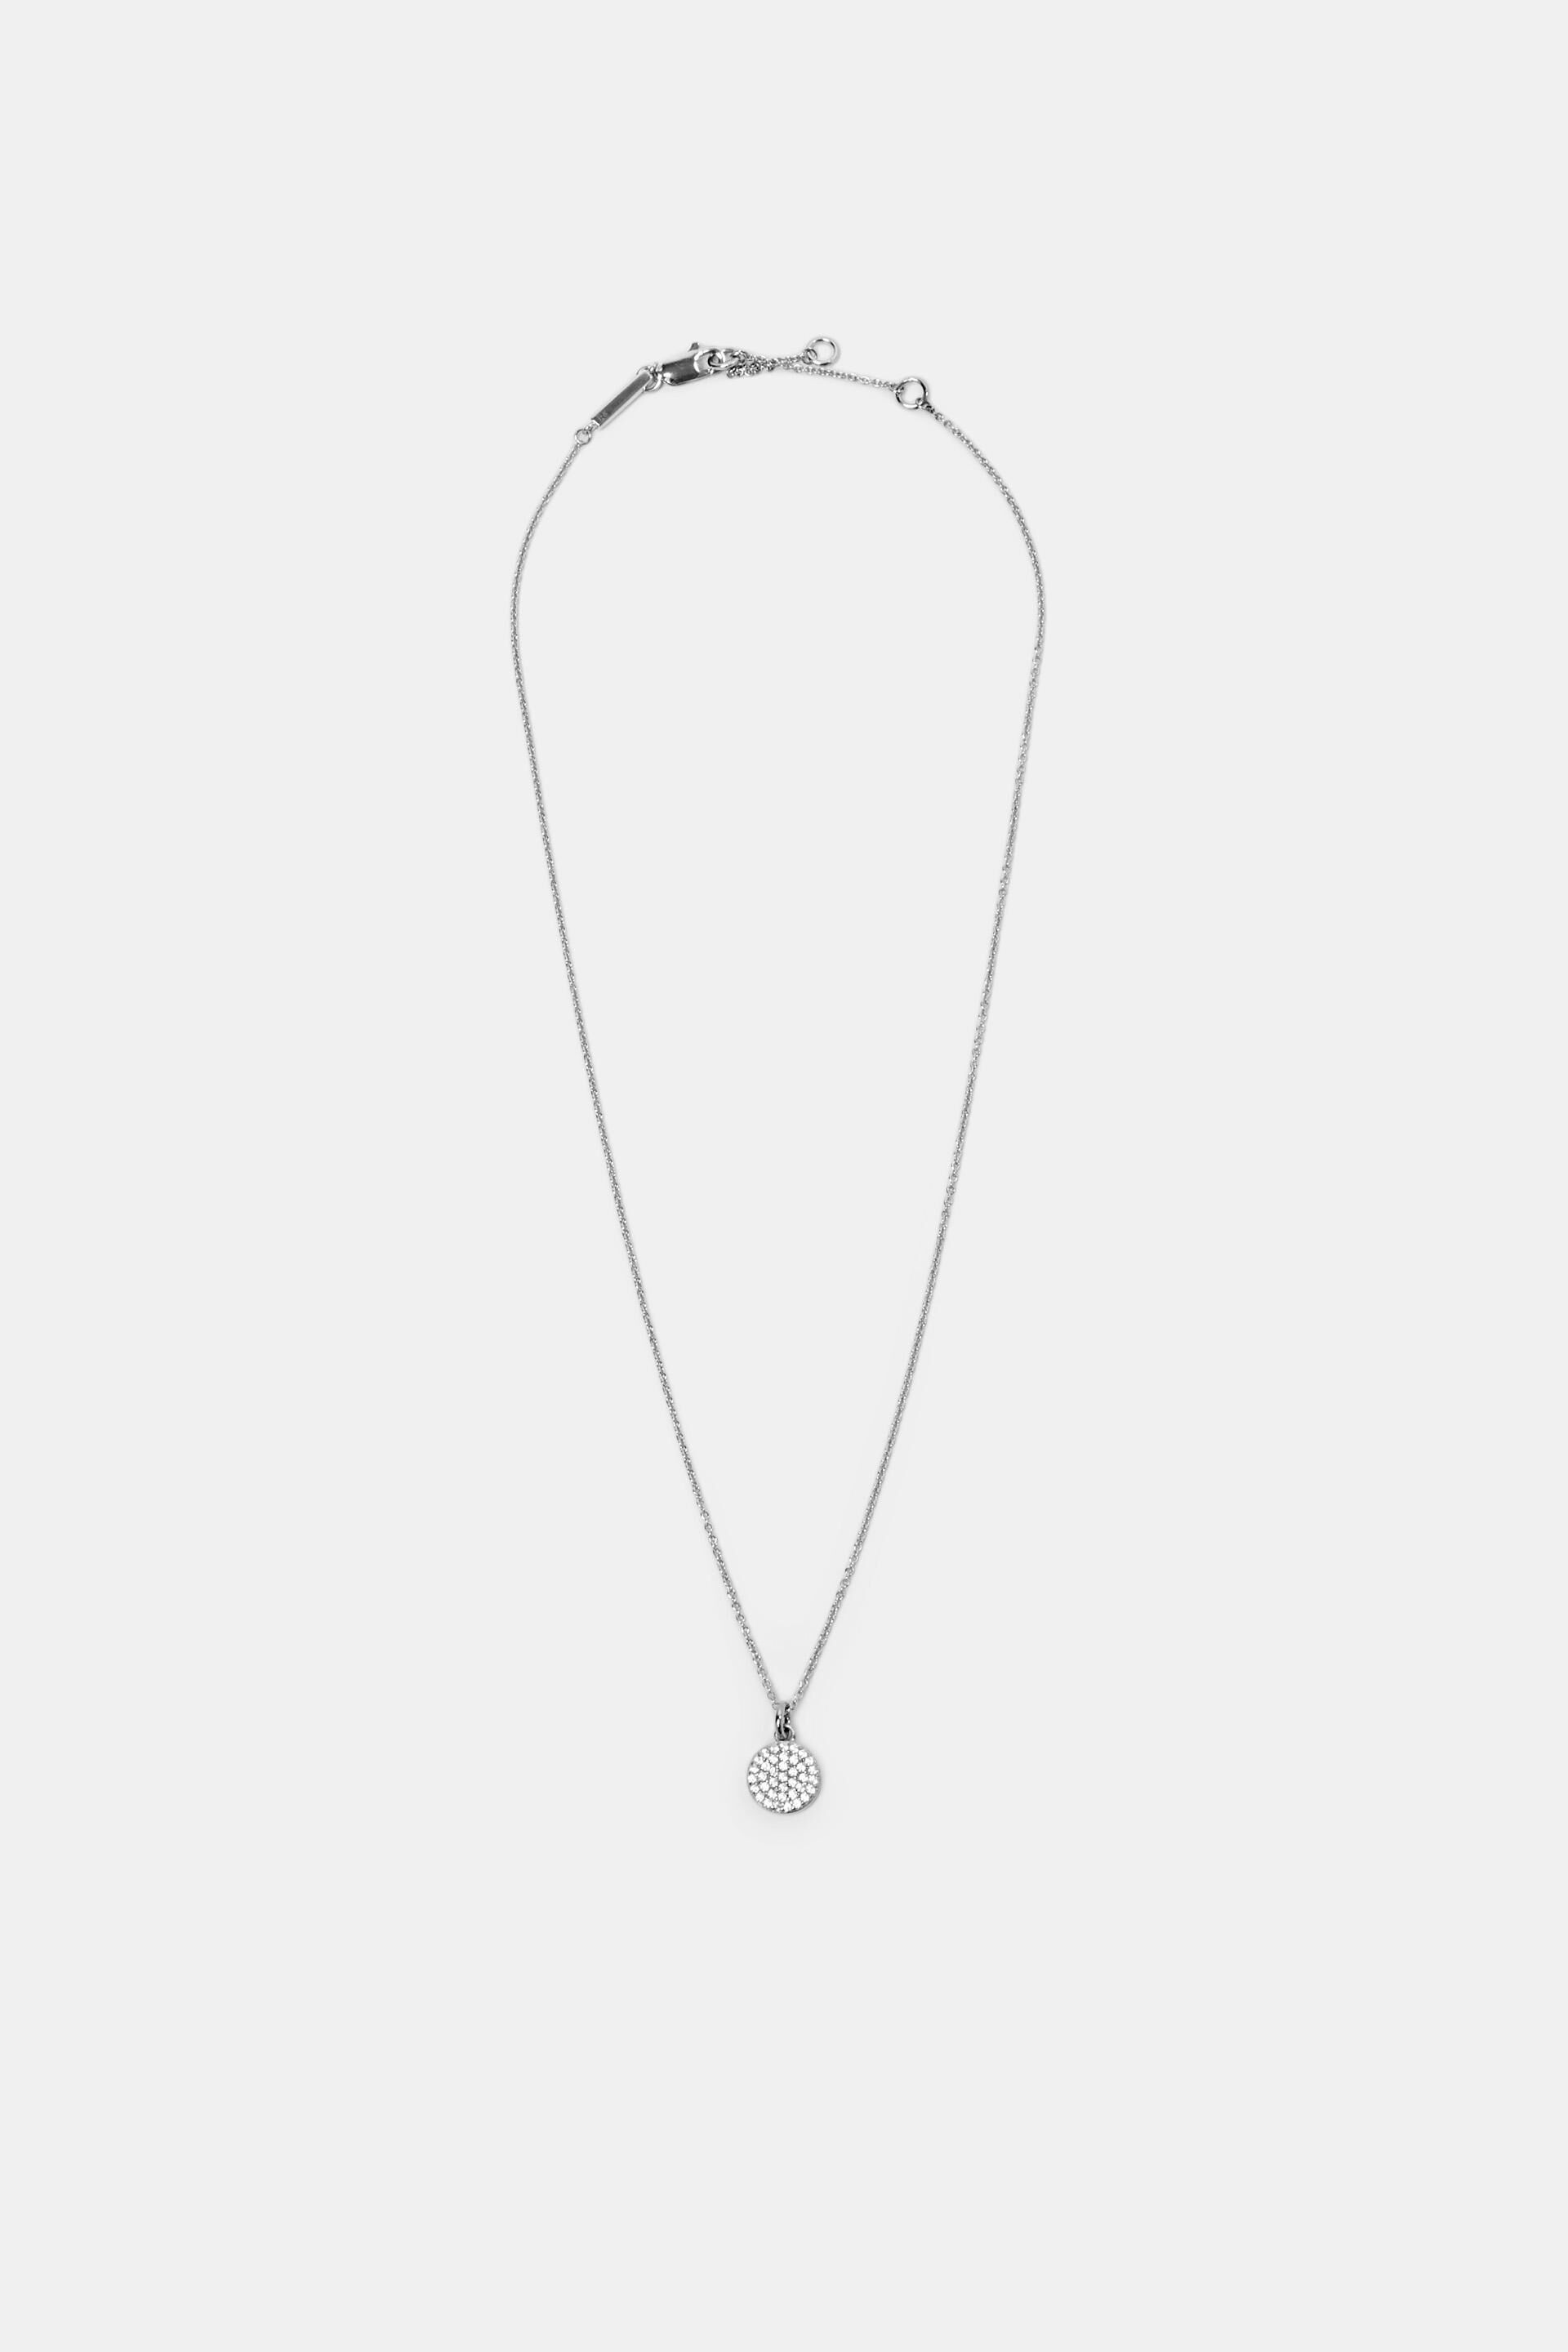 Esprit sterling silver zirconia Necklace pendant, with